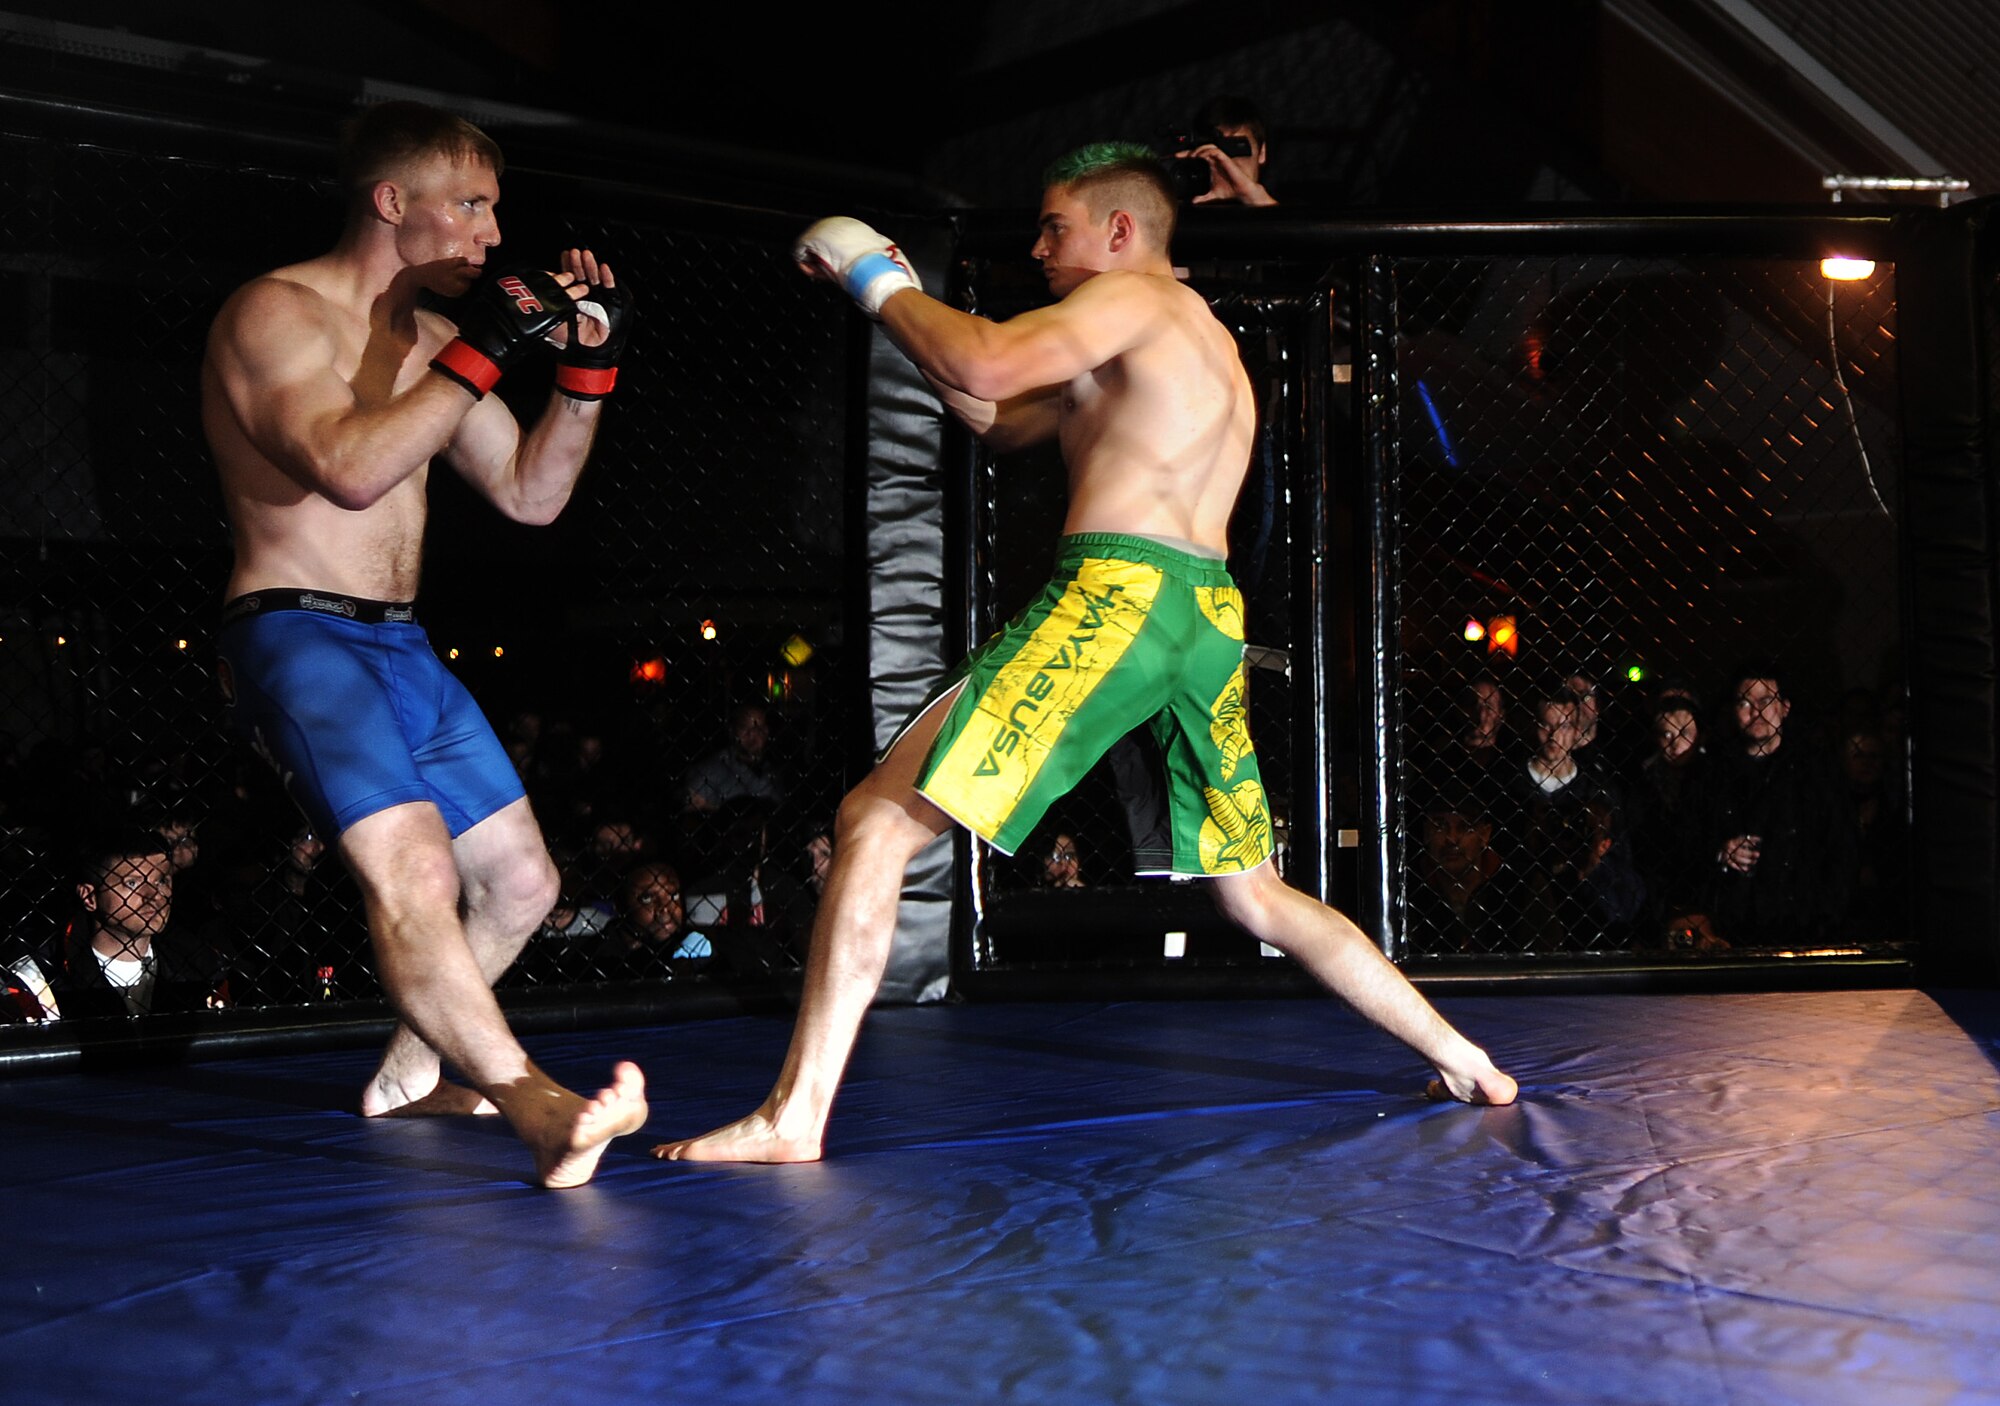 BAUMHOLDER, Germany -- Airman 1st Class Sean Whitaker, left, Spangdahlem mixed martial arts team member from Pittsburgh, fights in his first cage fight Nov. 17, 2012, at Kombat Komplett 7 in Baumholder. Kombat Komplett 7 is a German MMA event in which members of various nations participate. Whitaker, a member of Spangdahlem Air Base, faced off against a local national in his first fight. (U.S. Air Force photo by Senior Airman Natasha Stannard/Released)